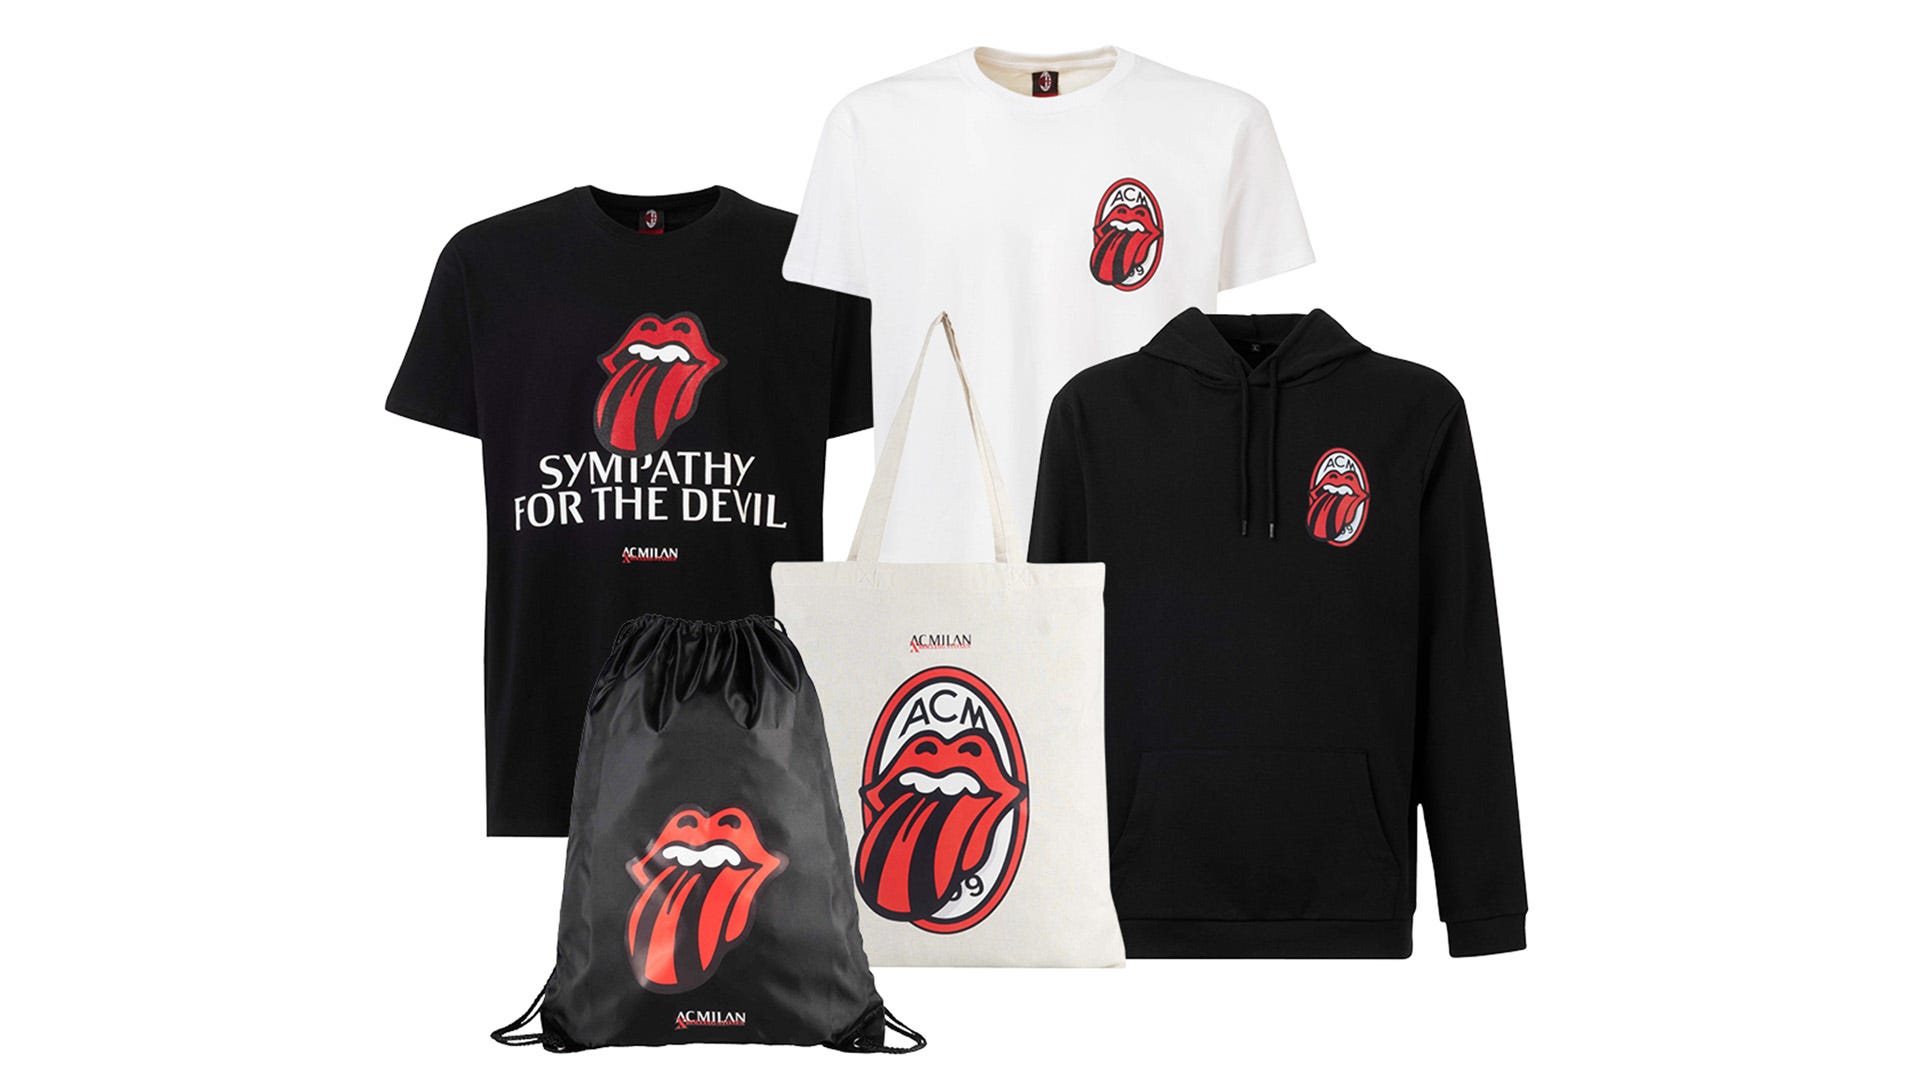 Rolling Stones x AC Milan collection 